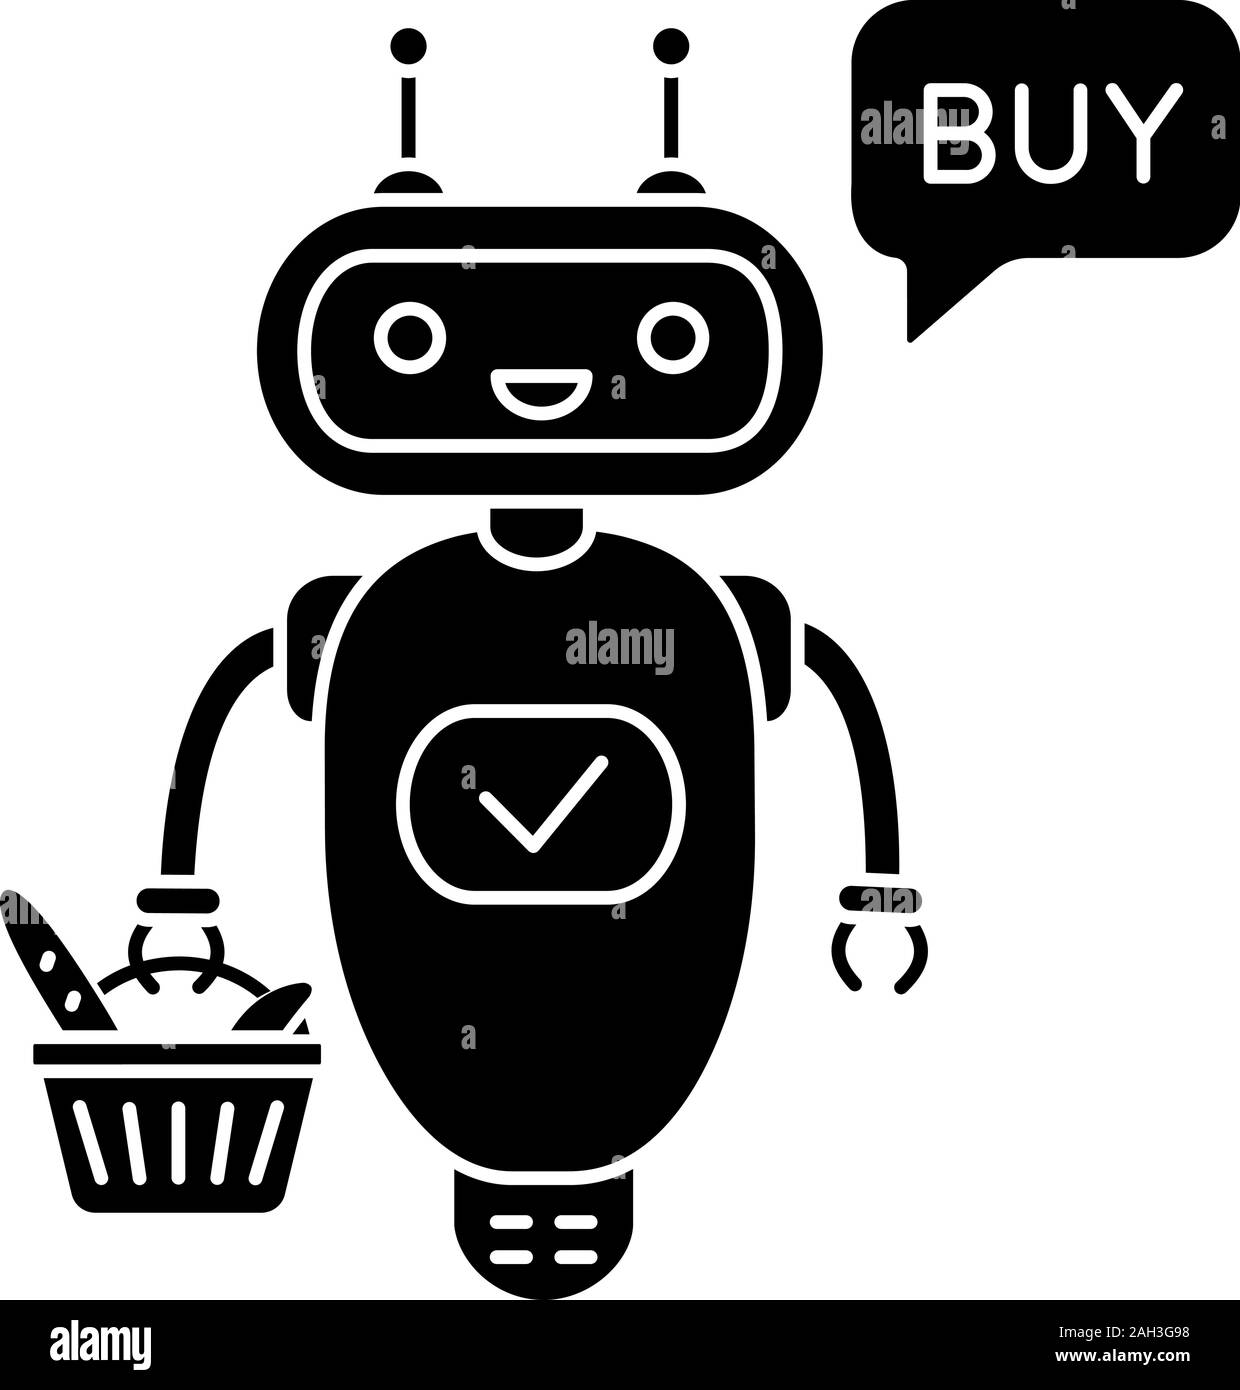 Online customer service chatbot glyph icon. Silhouette symbol. Talkbot with grocery basket says buy. Modern robot. Virtual shopping assistant. Negativ Stock Vector